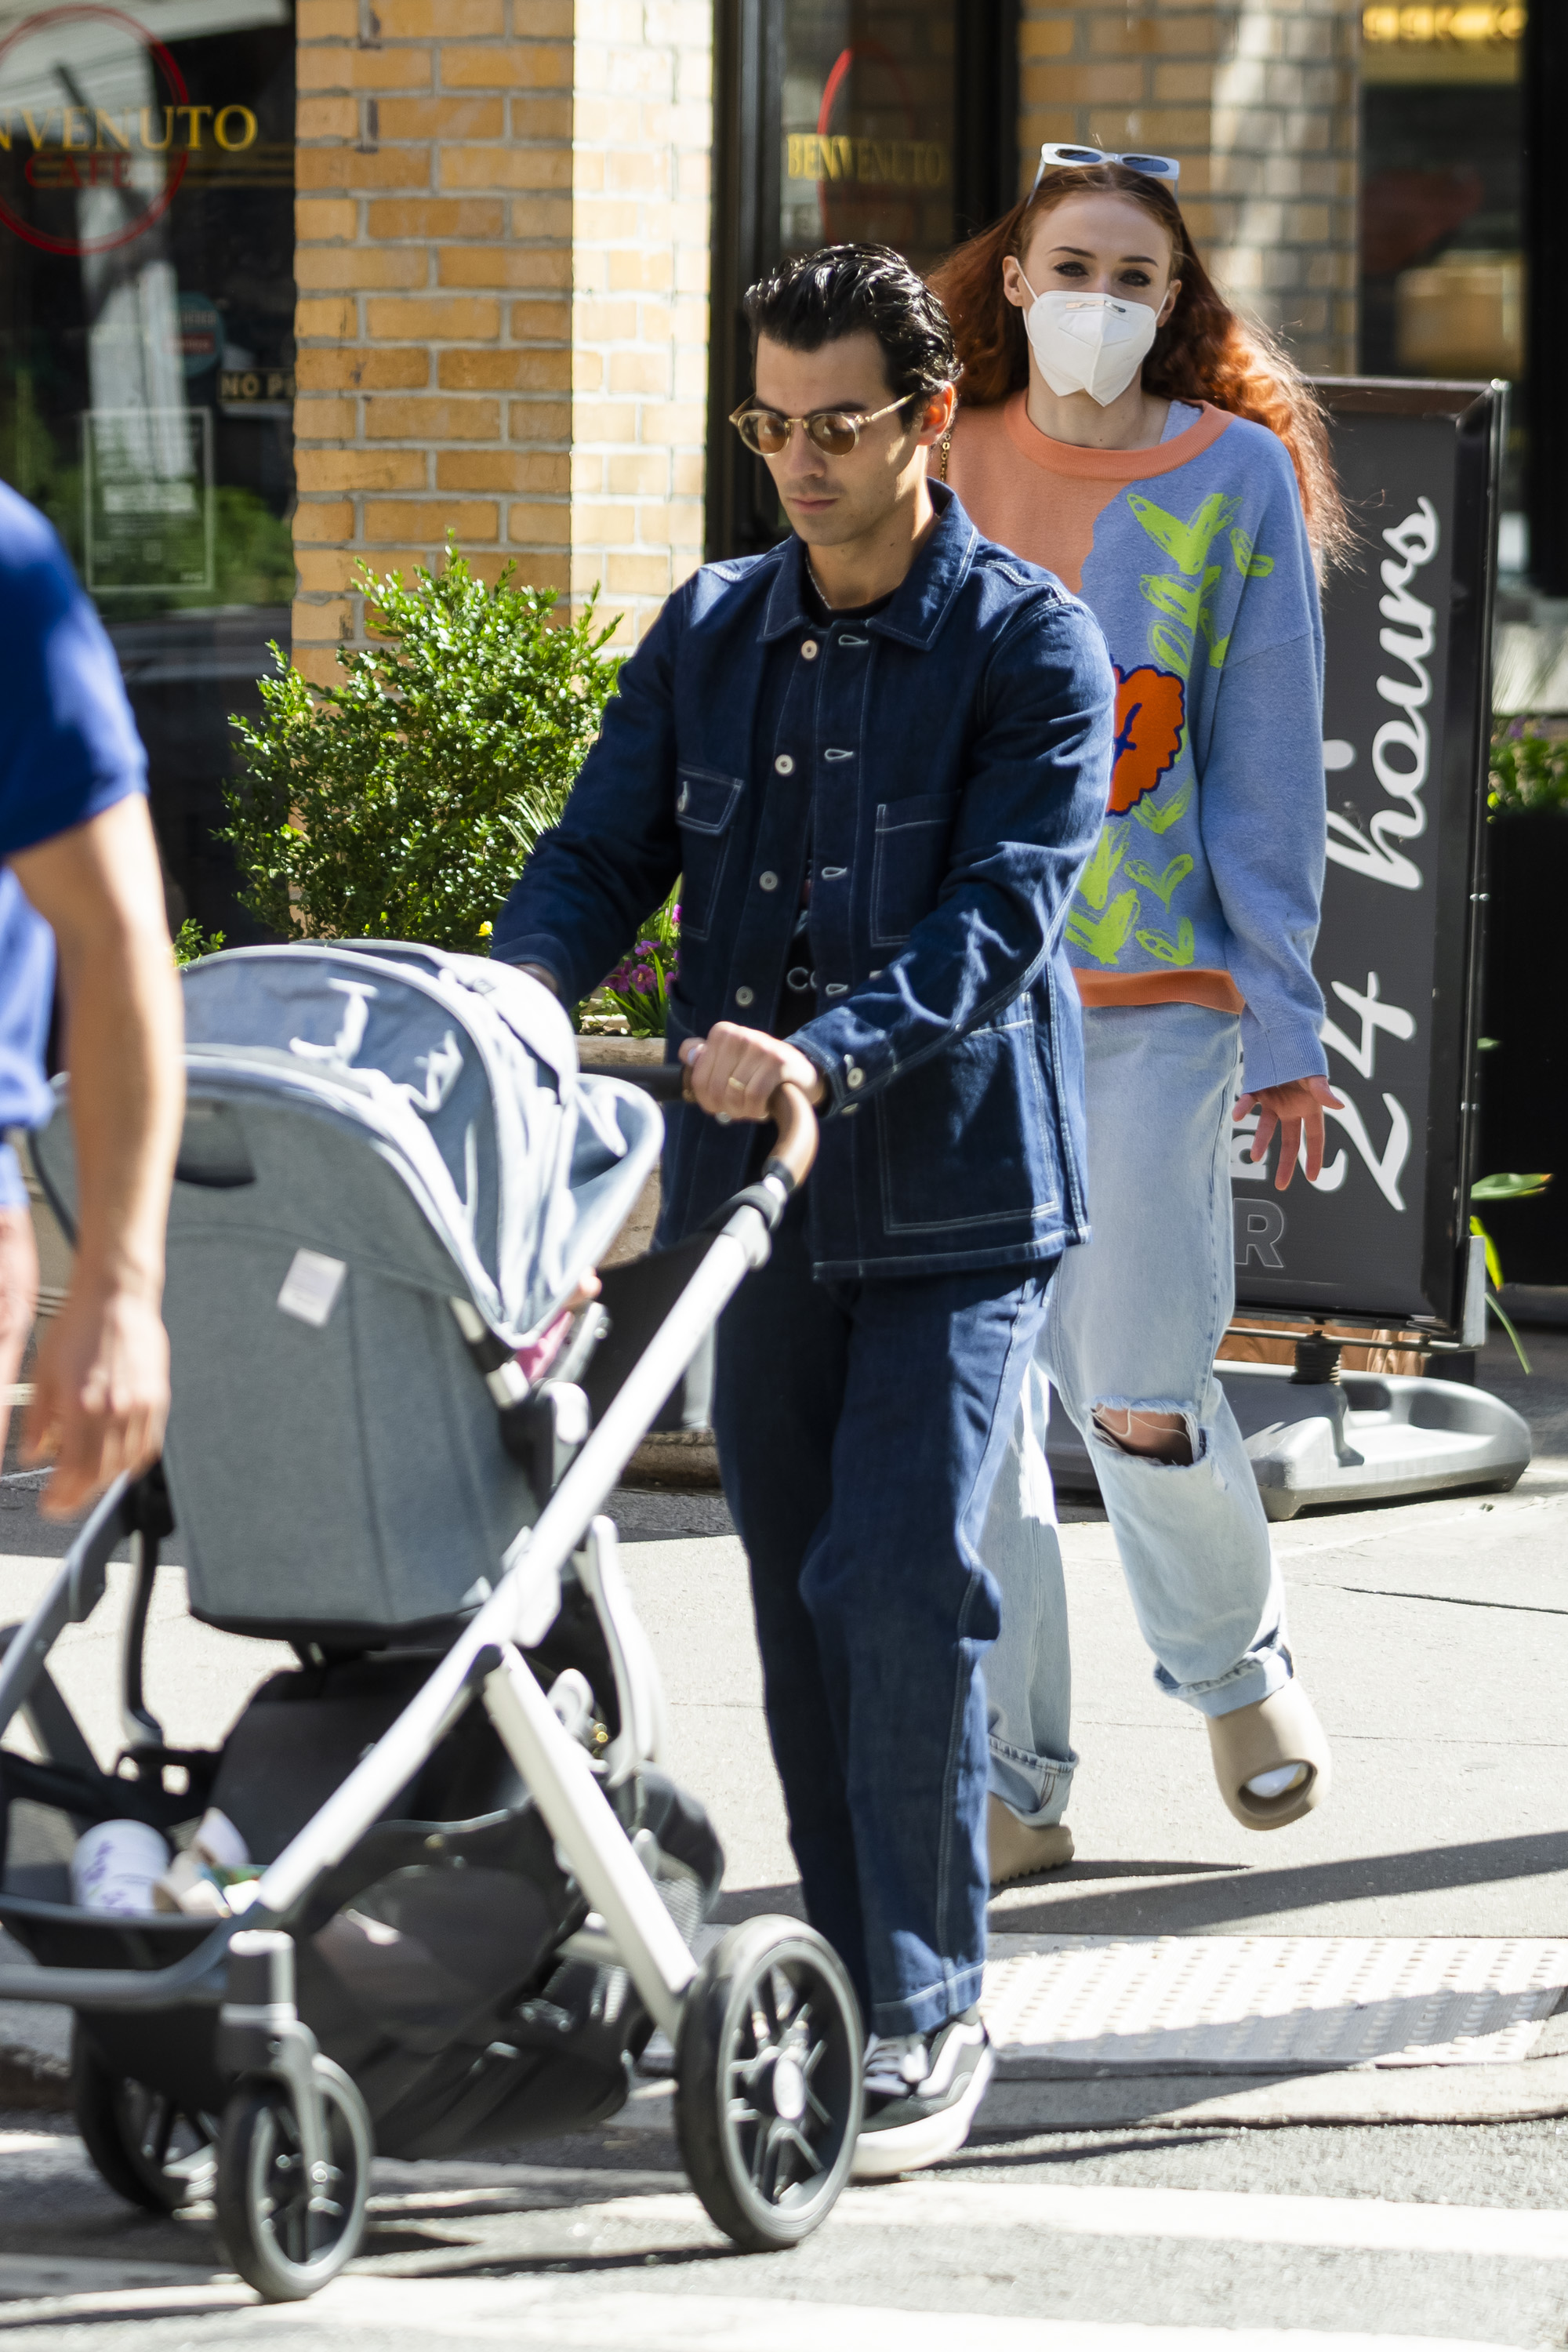 Joe Jonas pushes the baby stroller while Sophie Turner follows him in New York City on October 1, 2021 | Source: Getty Images